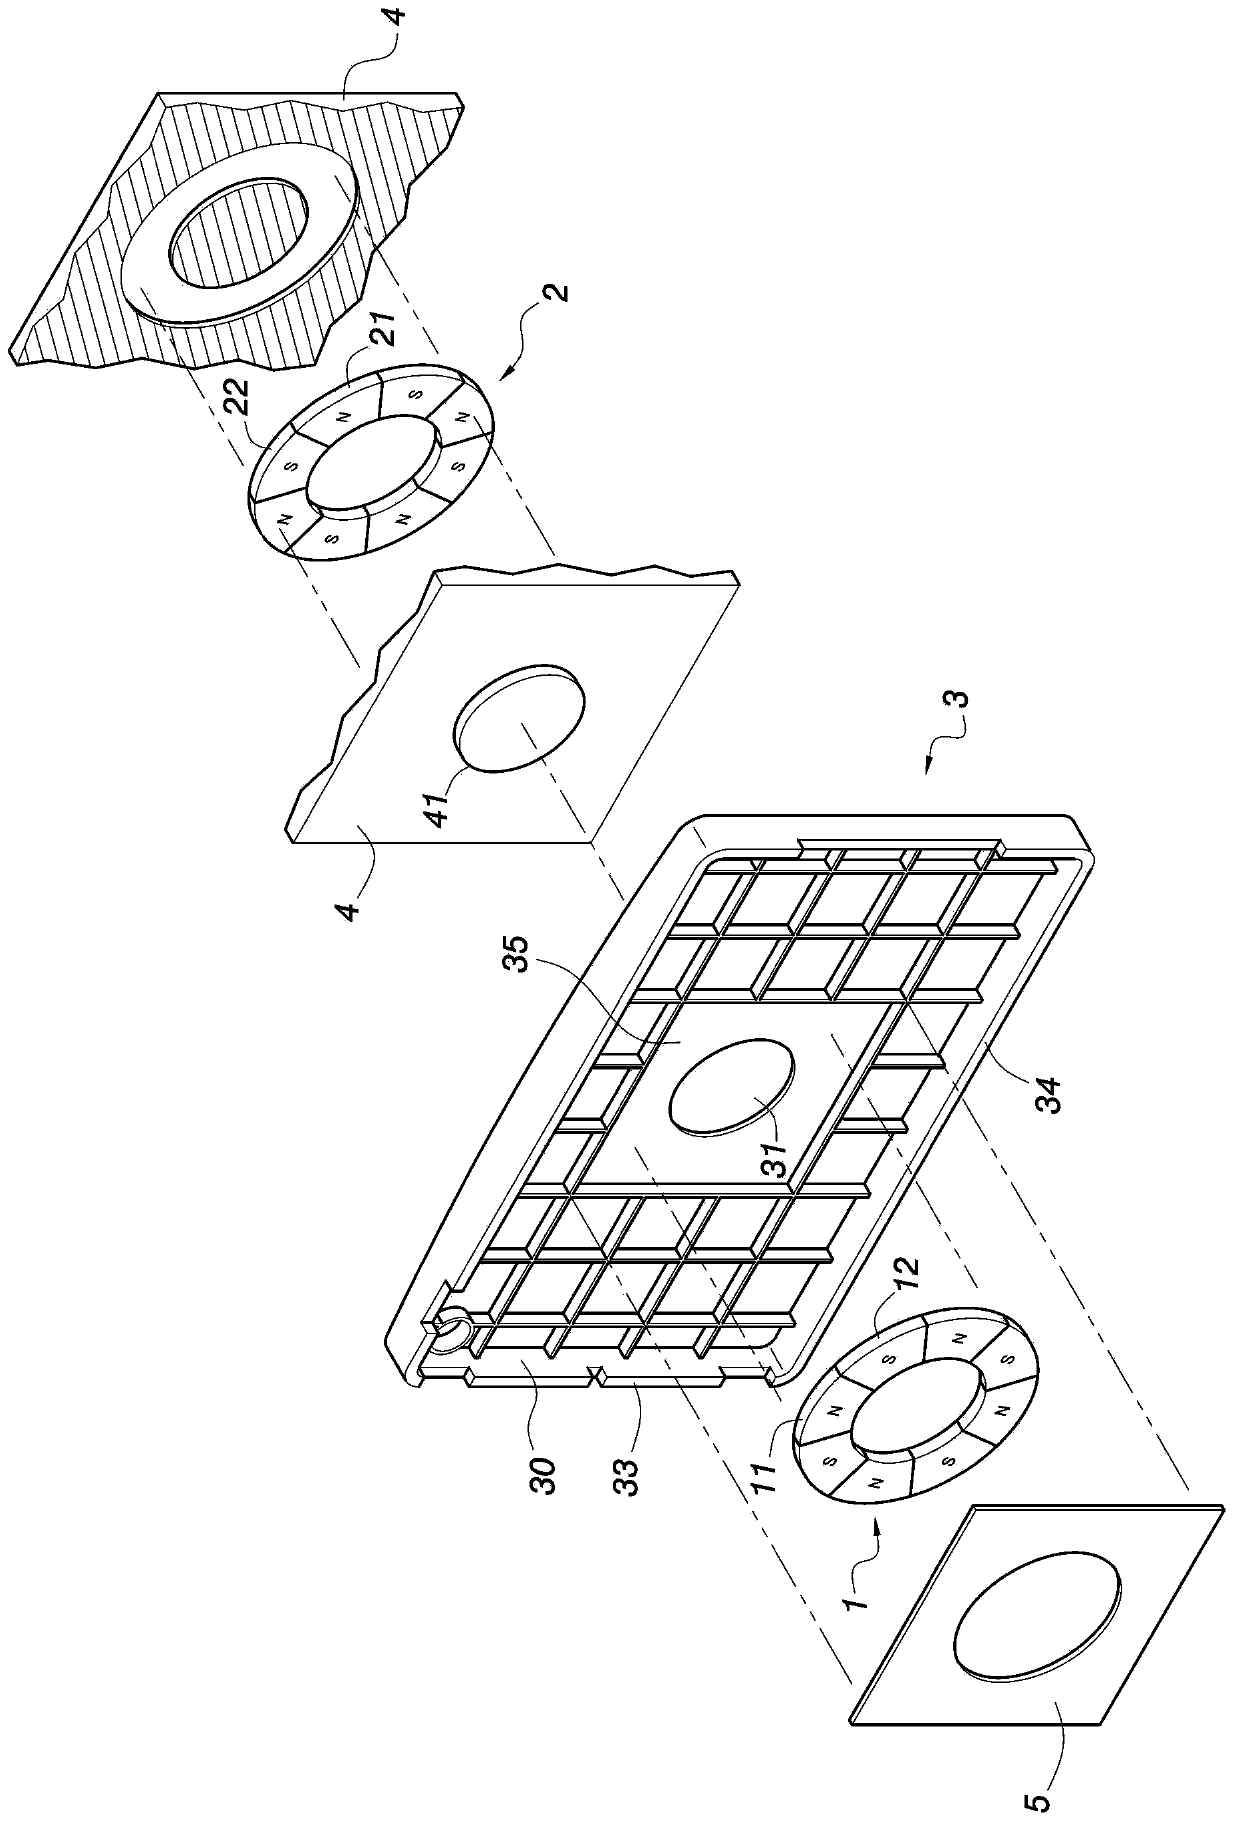 Positioning assembly for electronic device